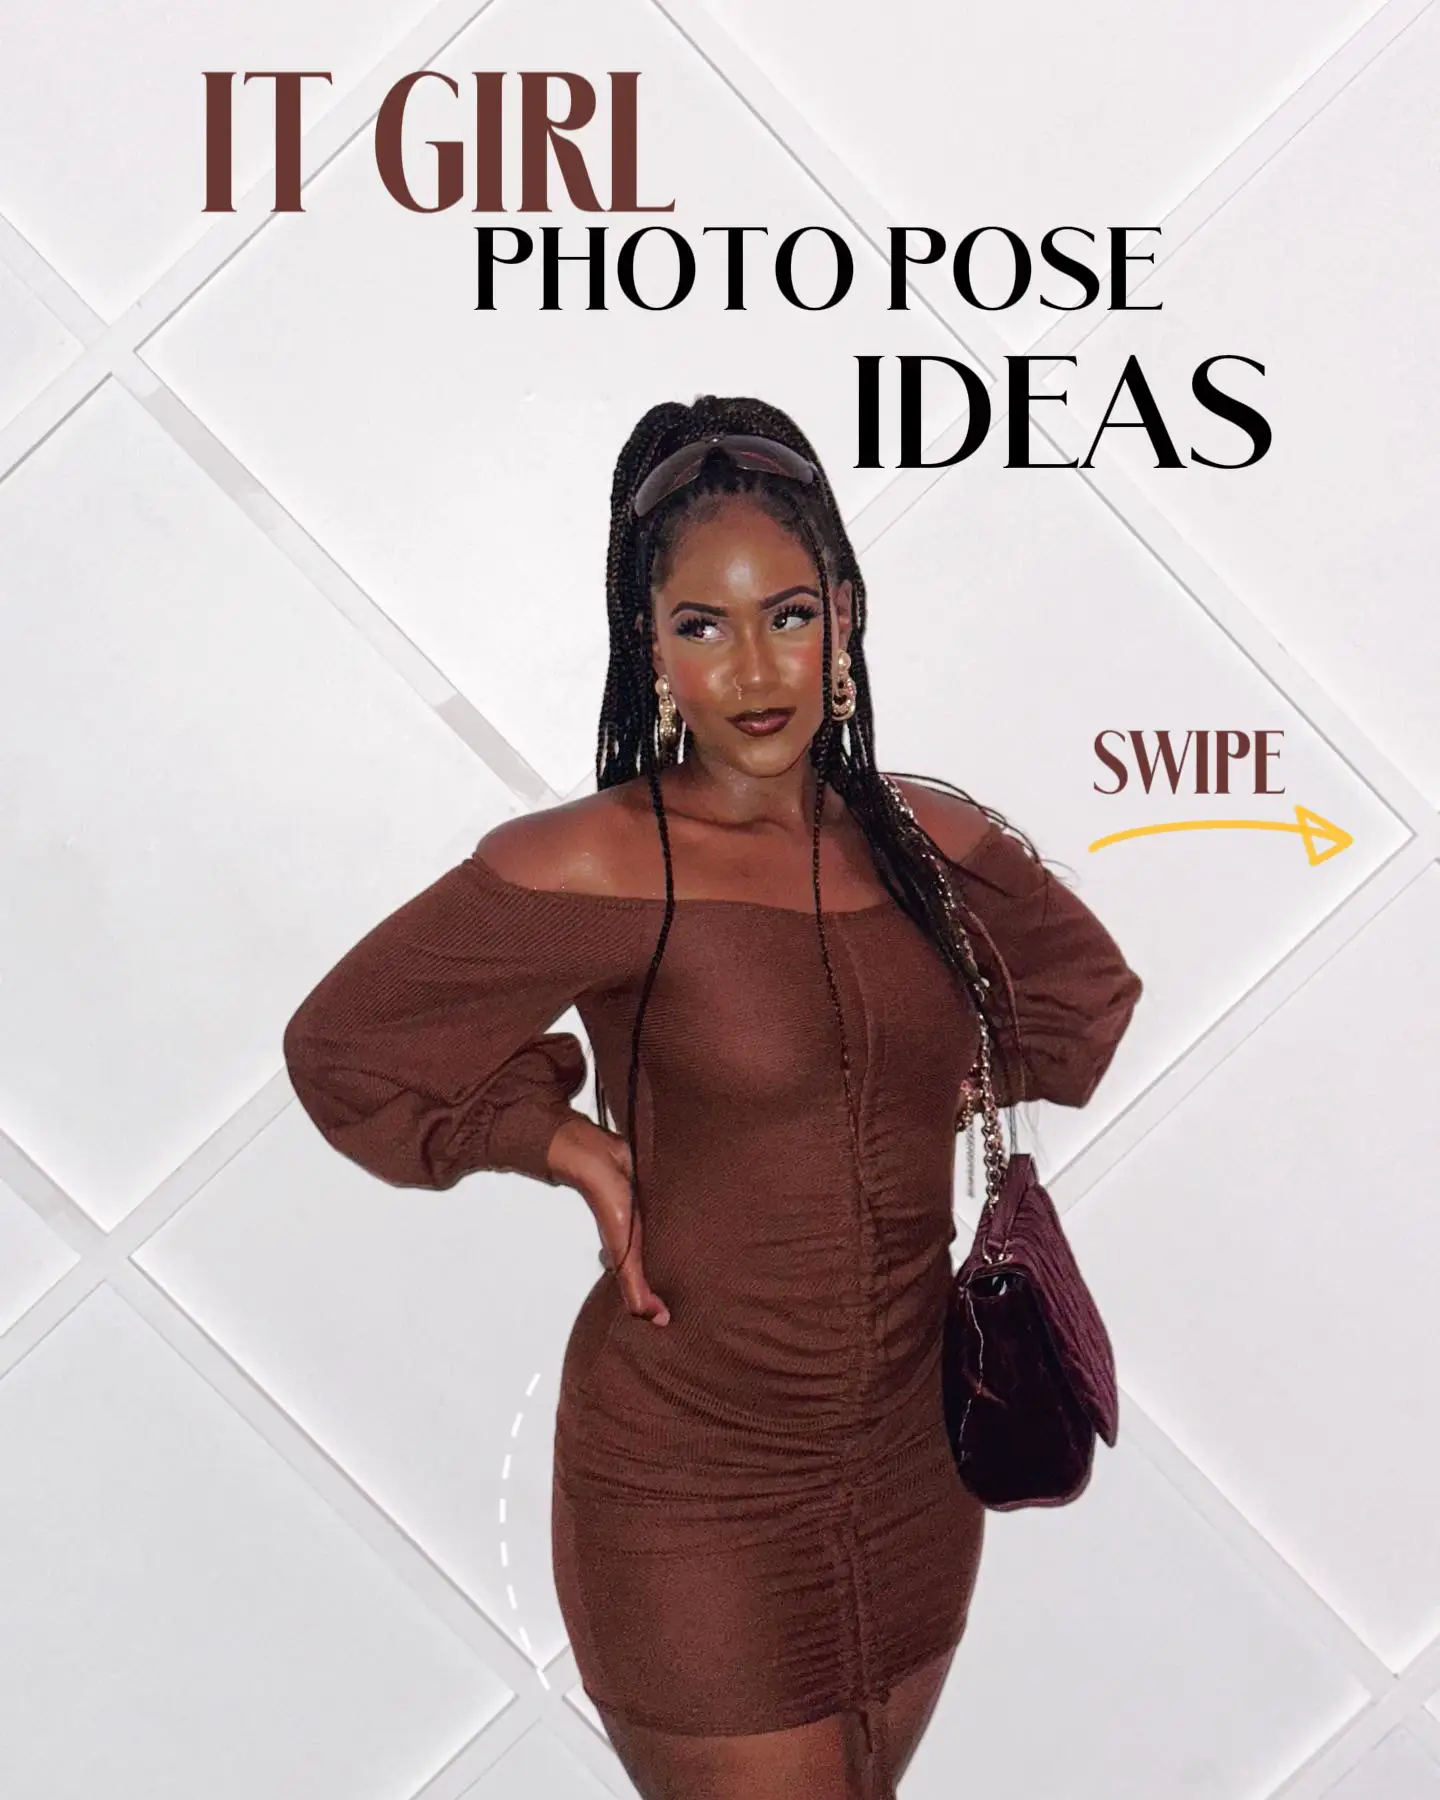 how to pose for photos to look slimmer - Lemon8 Search